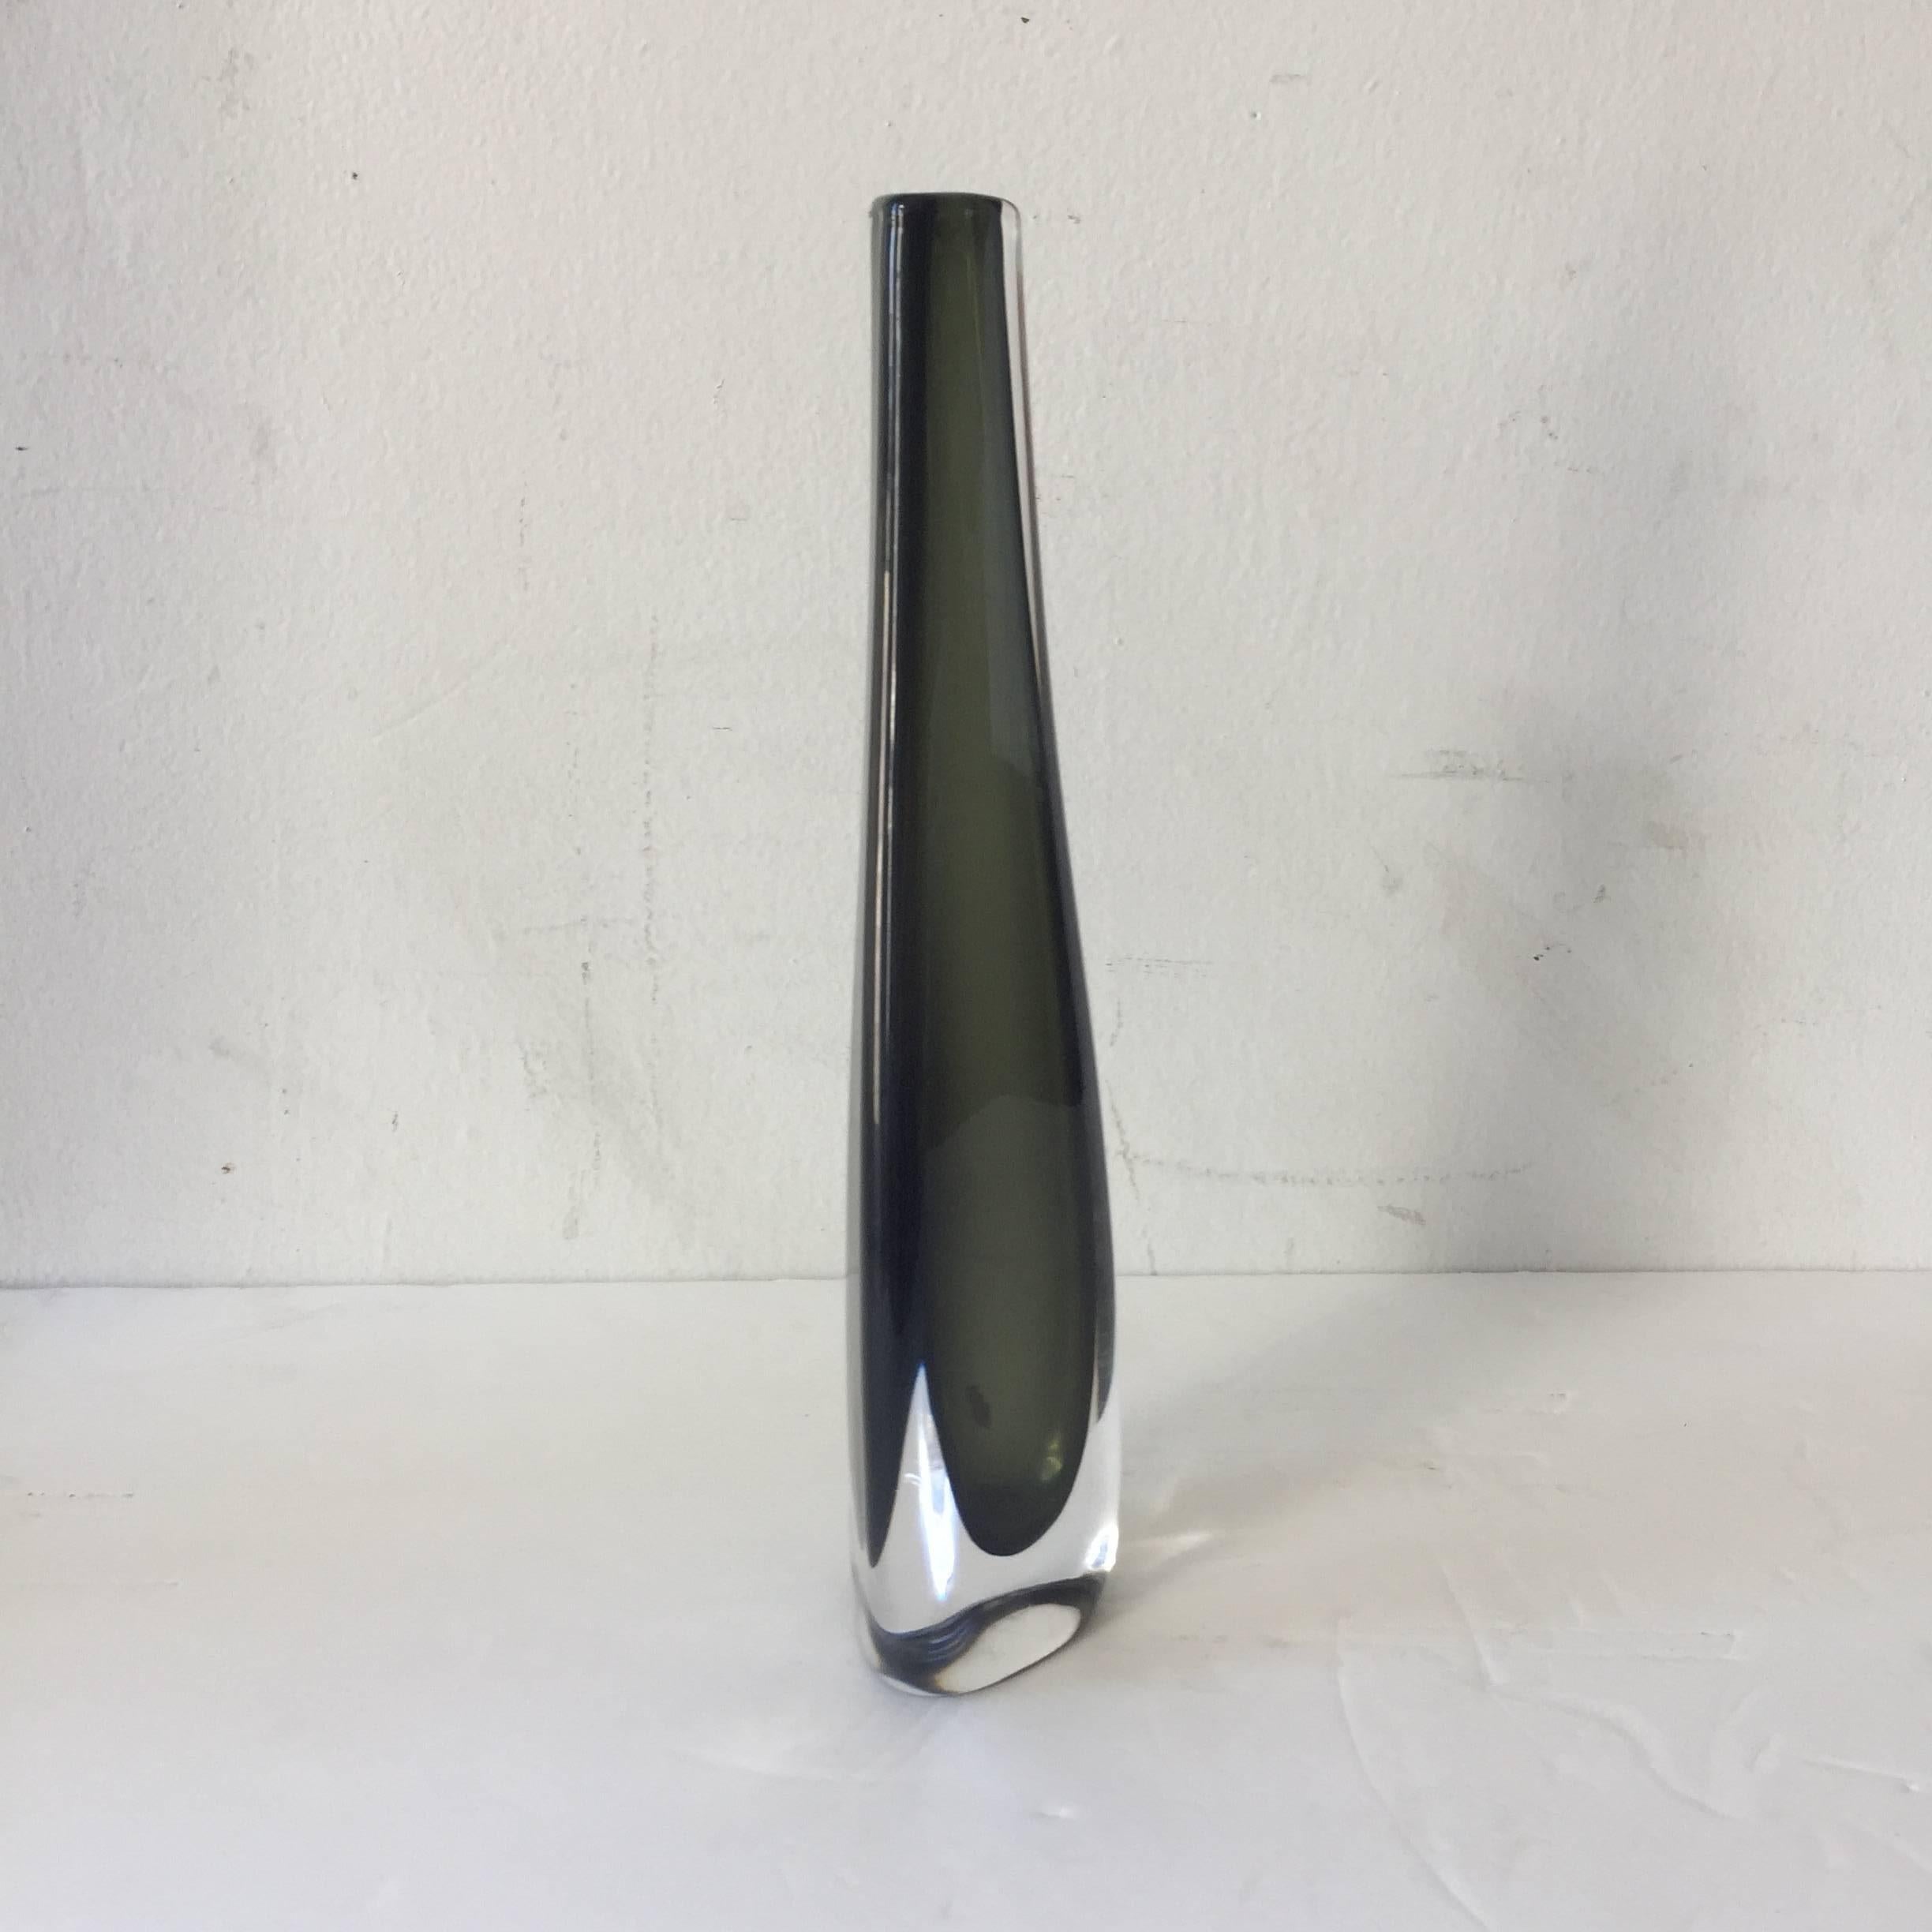 Smoked Sommerso glass vase, circa 1950s. Cased within a clear layer by Nils Landberg for Orrefors of Sweden signed in underside.